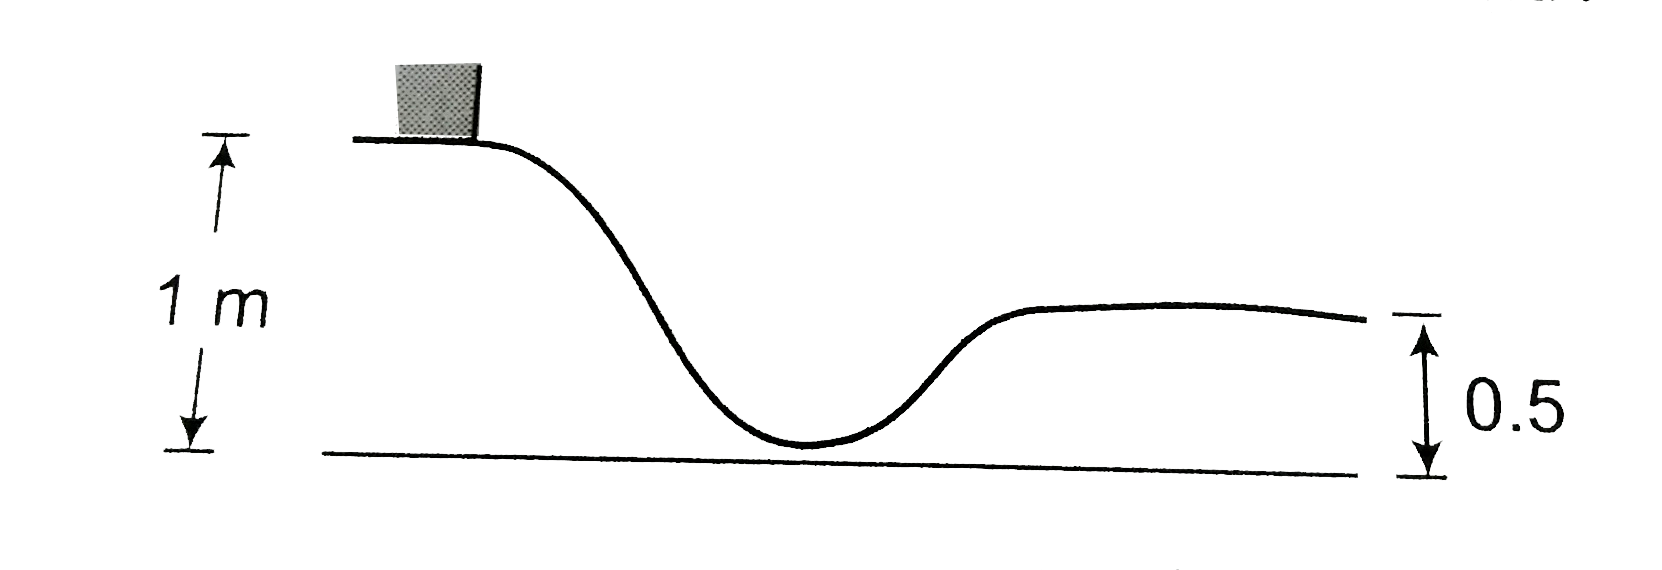 The figure shown a particle sliding on a frictionless track, which teminates in a straight horizontal section. If the particle starts slipping from the point A, how far away from the track will the particle hit the ground?